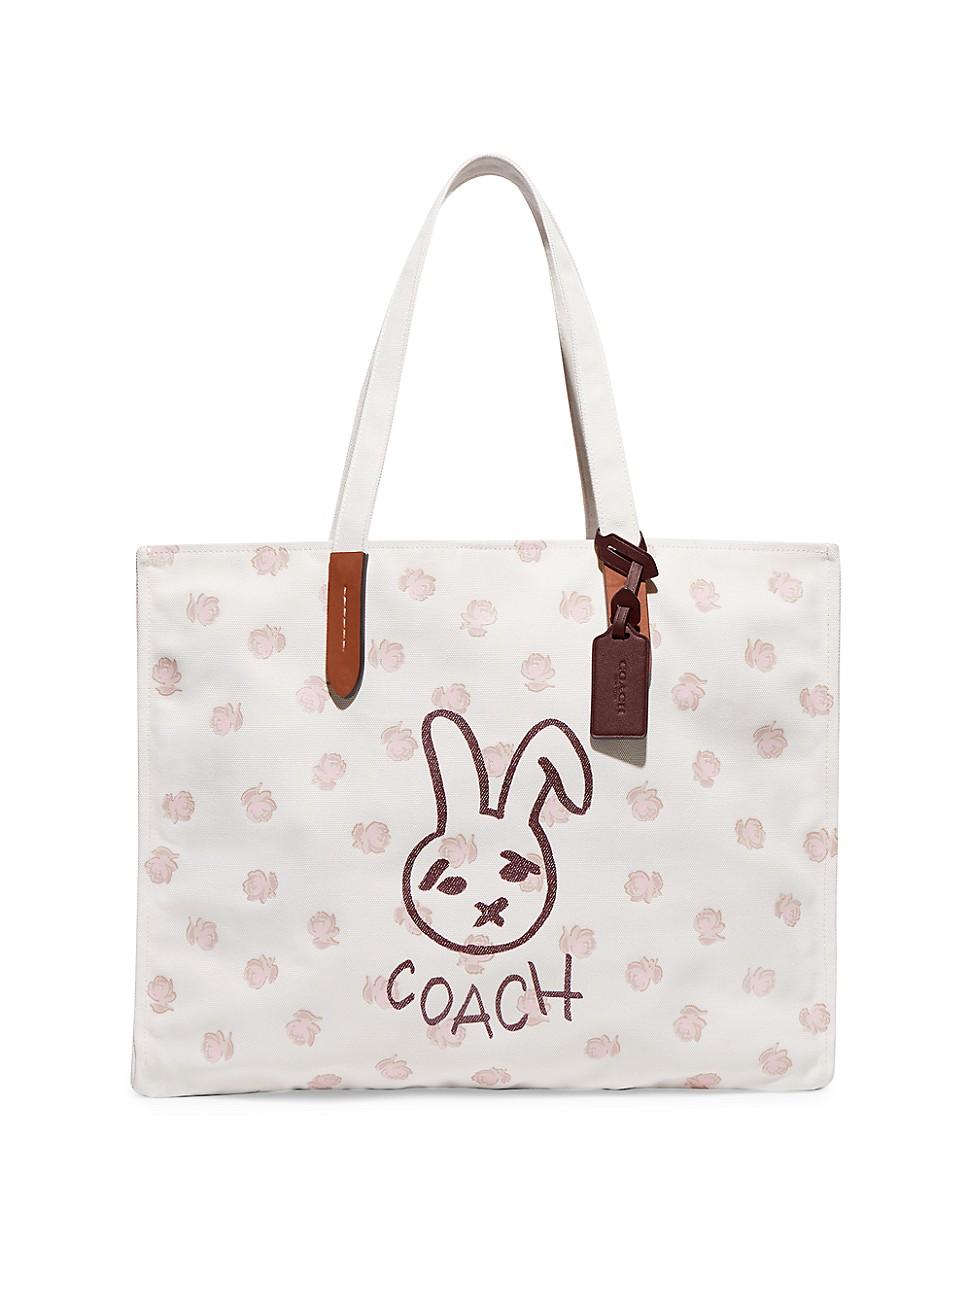 COACH Bunny Graphic Tote Bag in White | Lyst